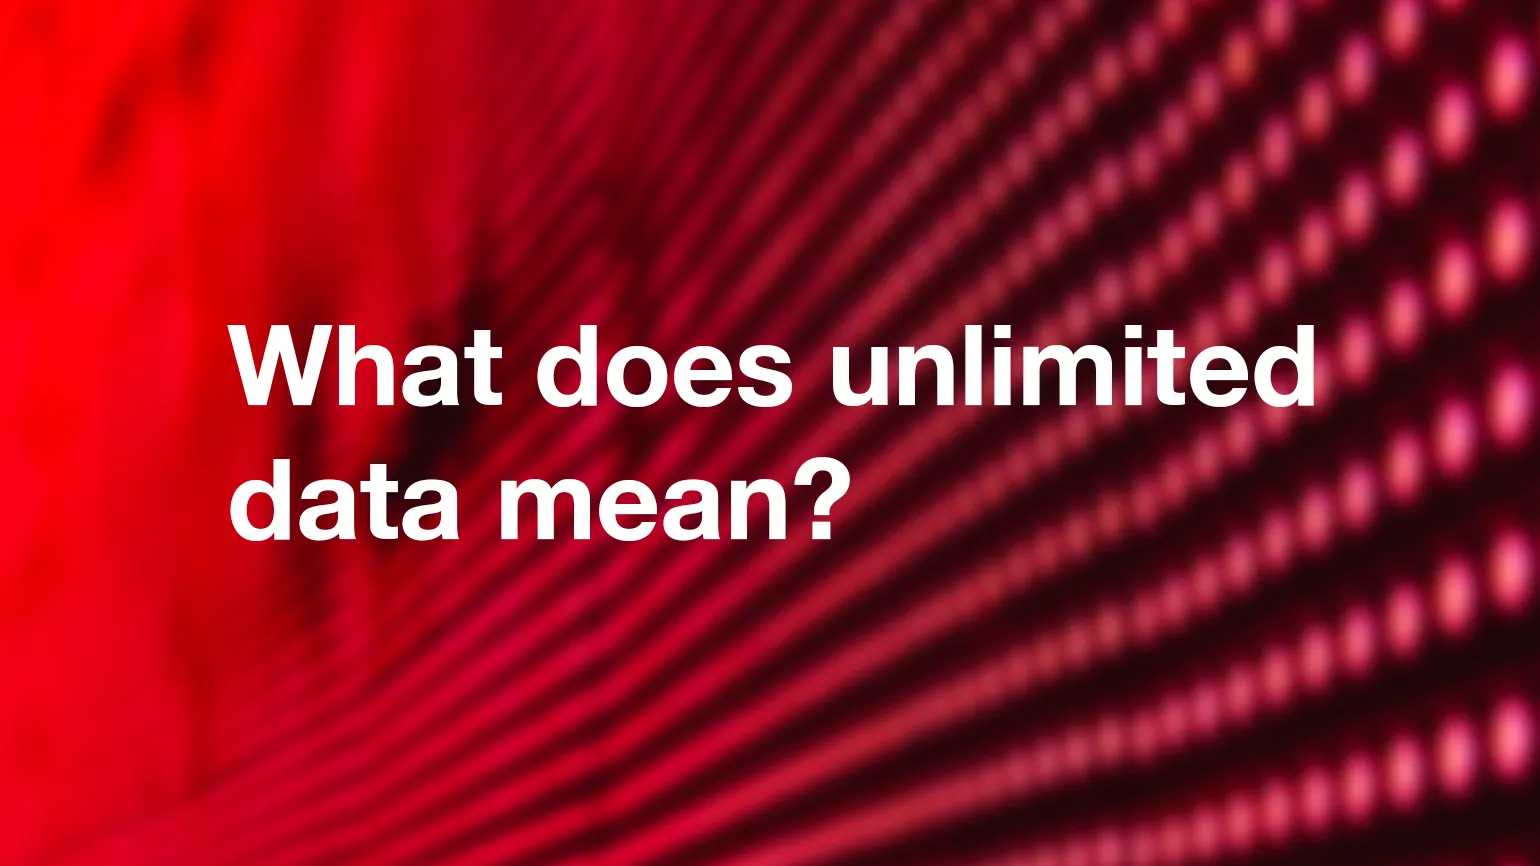 What does unlimited data mean?